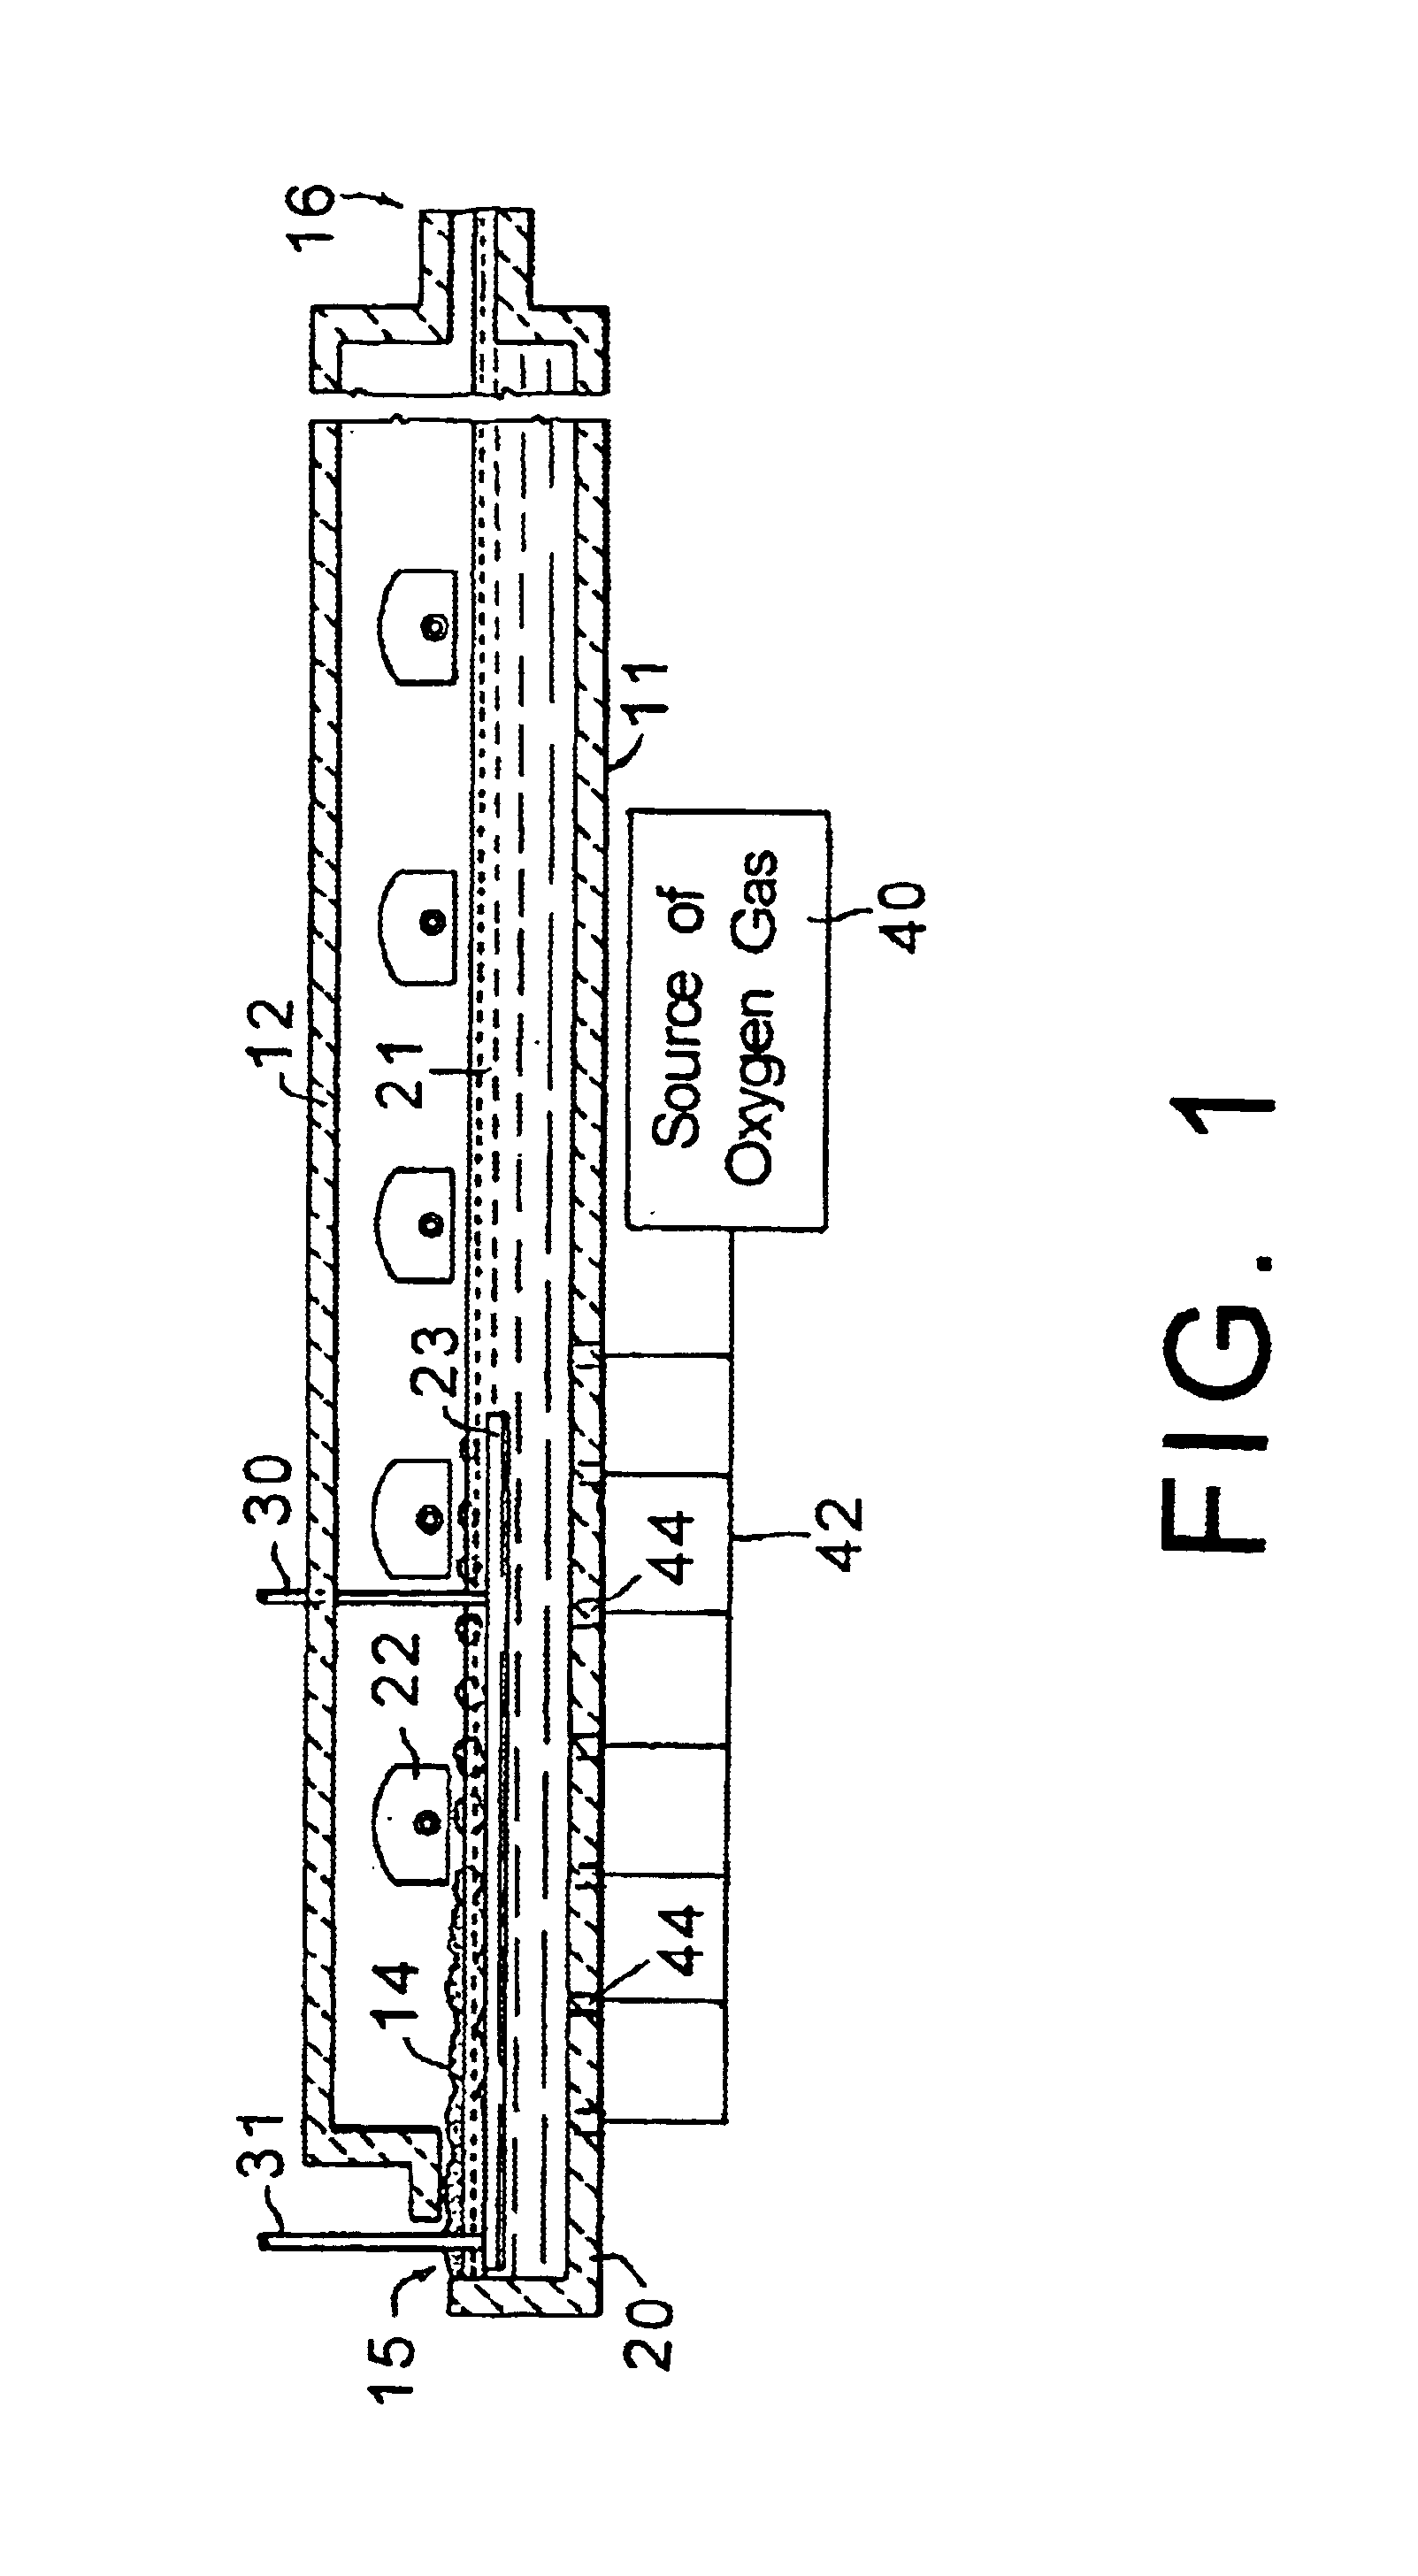 Method of making glass, a method and device for the control and setting of the redox state of redox fining agents in a glass melt